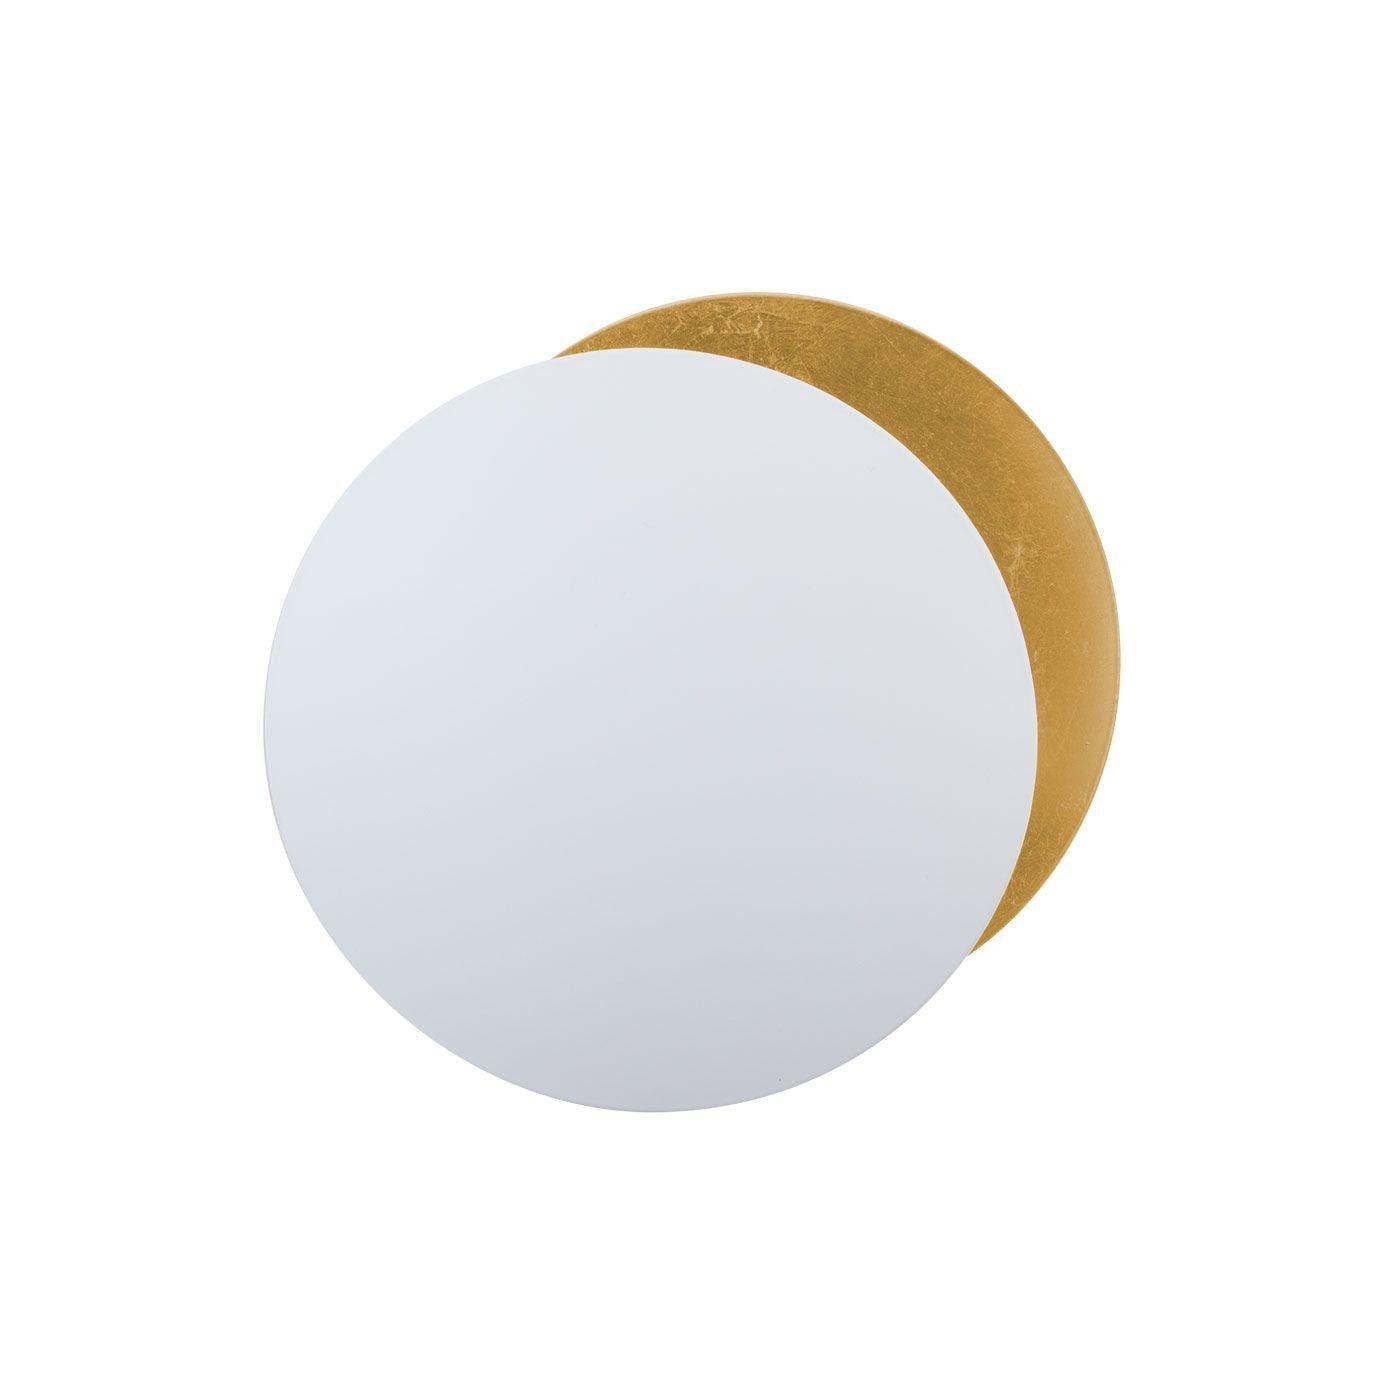 Wall Lamp "Lederam" Dimensions: 9.8″ in diameter and height (25cm x 25cm), color options: White or Gold, emits Cool White light.